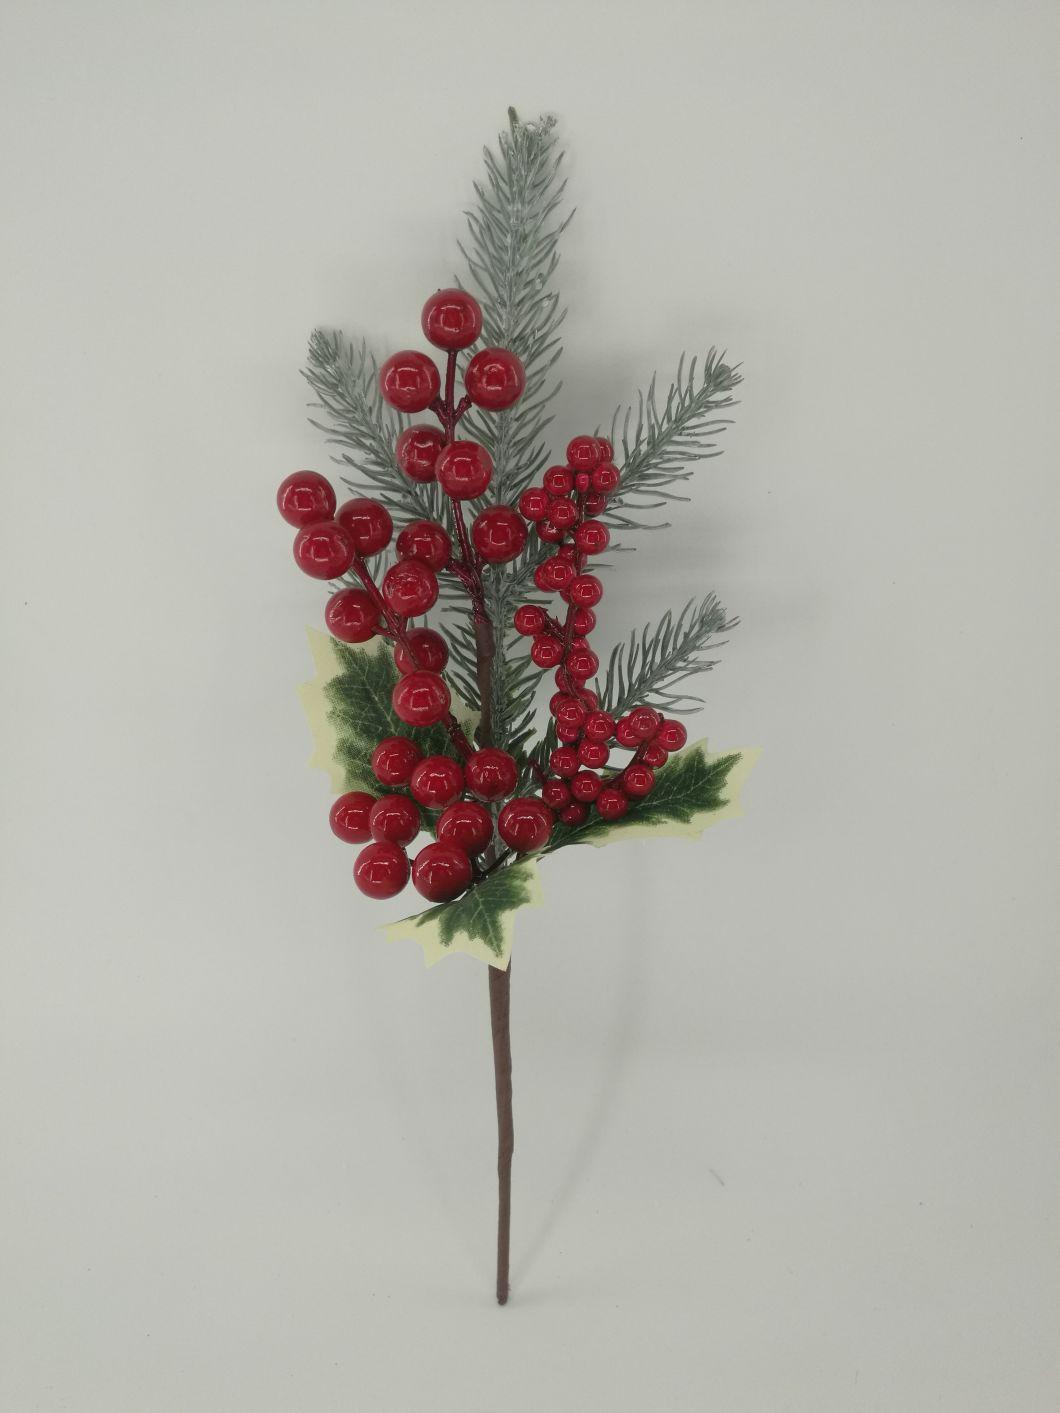 New Christmas Flowers Decoration Artificial Red Berries Branches